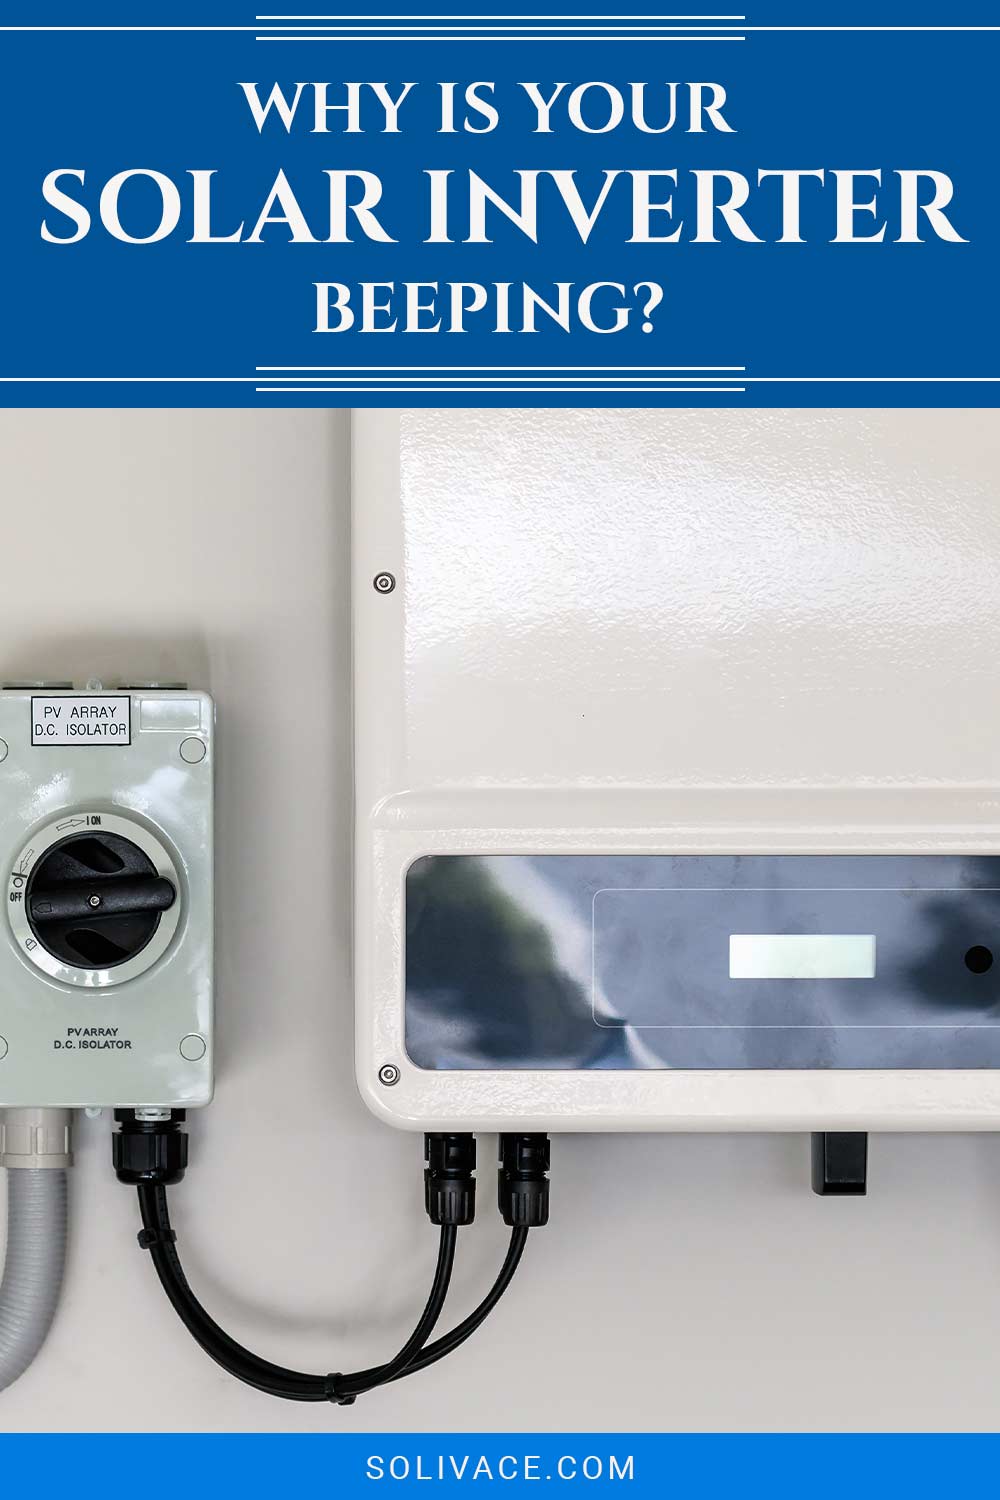 An inverter in front of white surface - Why Is Your Solar Inverter Beeping?